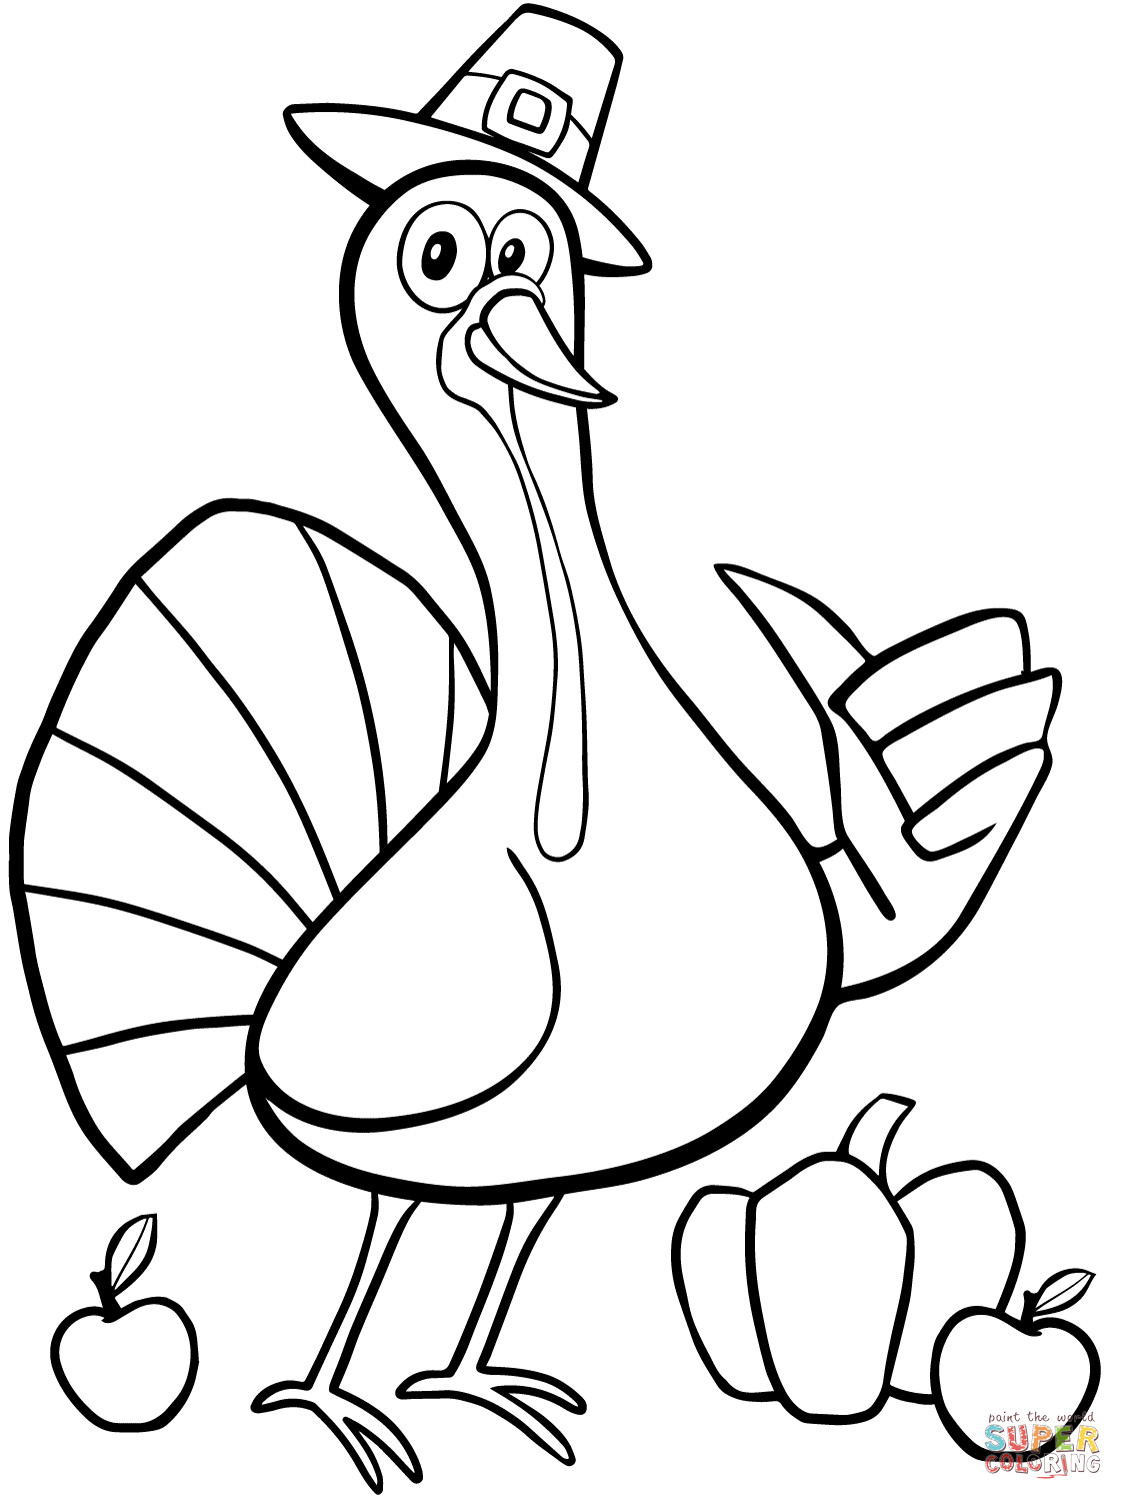 Thanksgiving Turkey Coloring Page
 Cool Thanksgiving Turkey coloring page